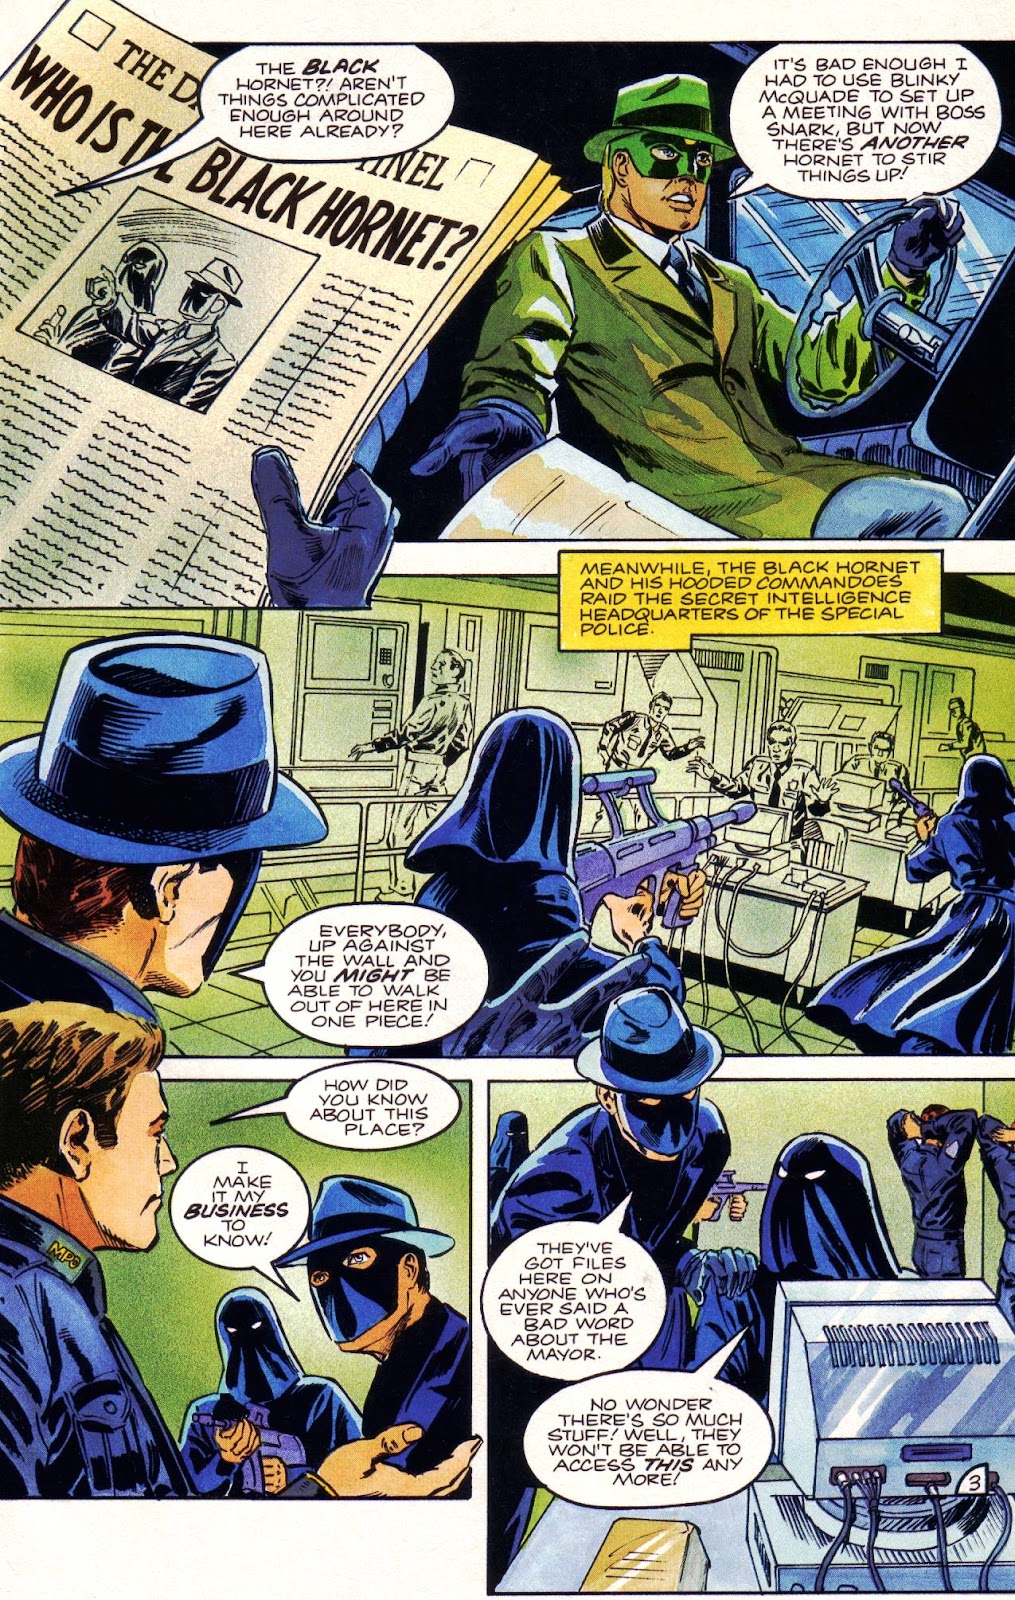 The Green Hornet: Solitary Sentinel issue 3 - Page 5